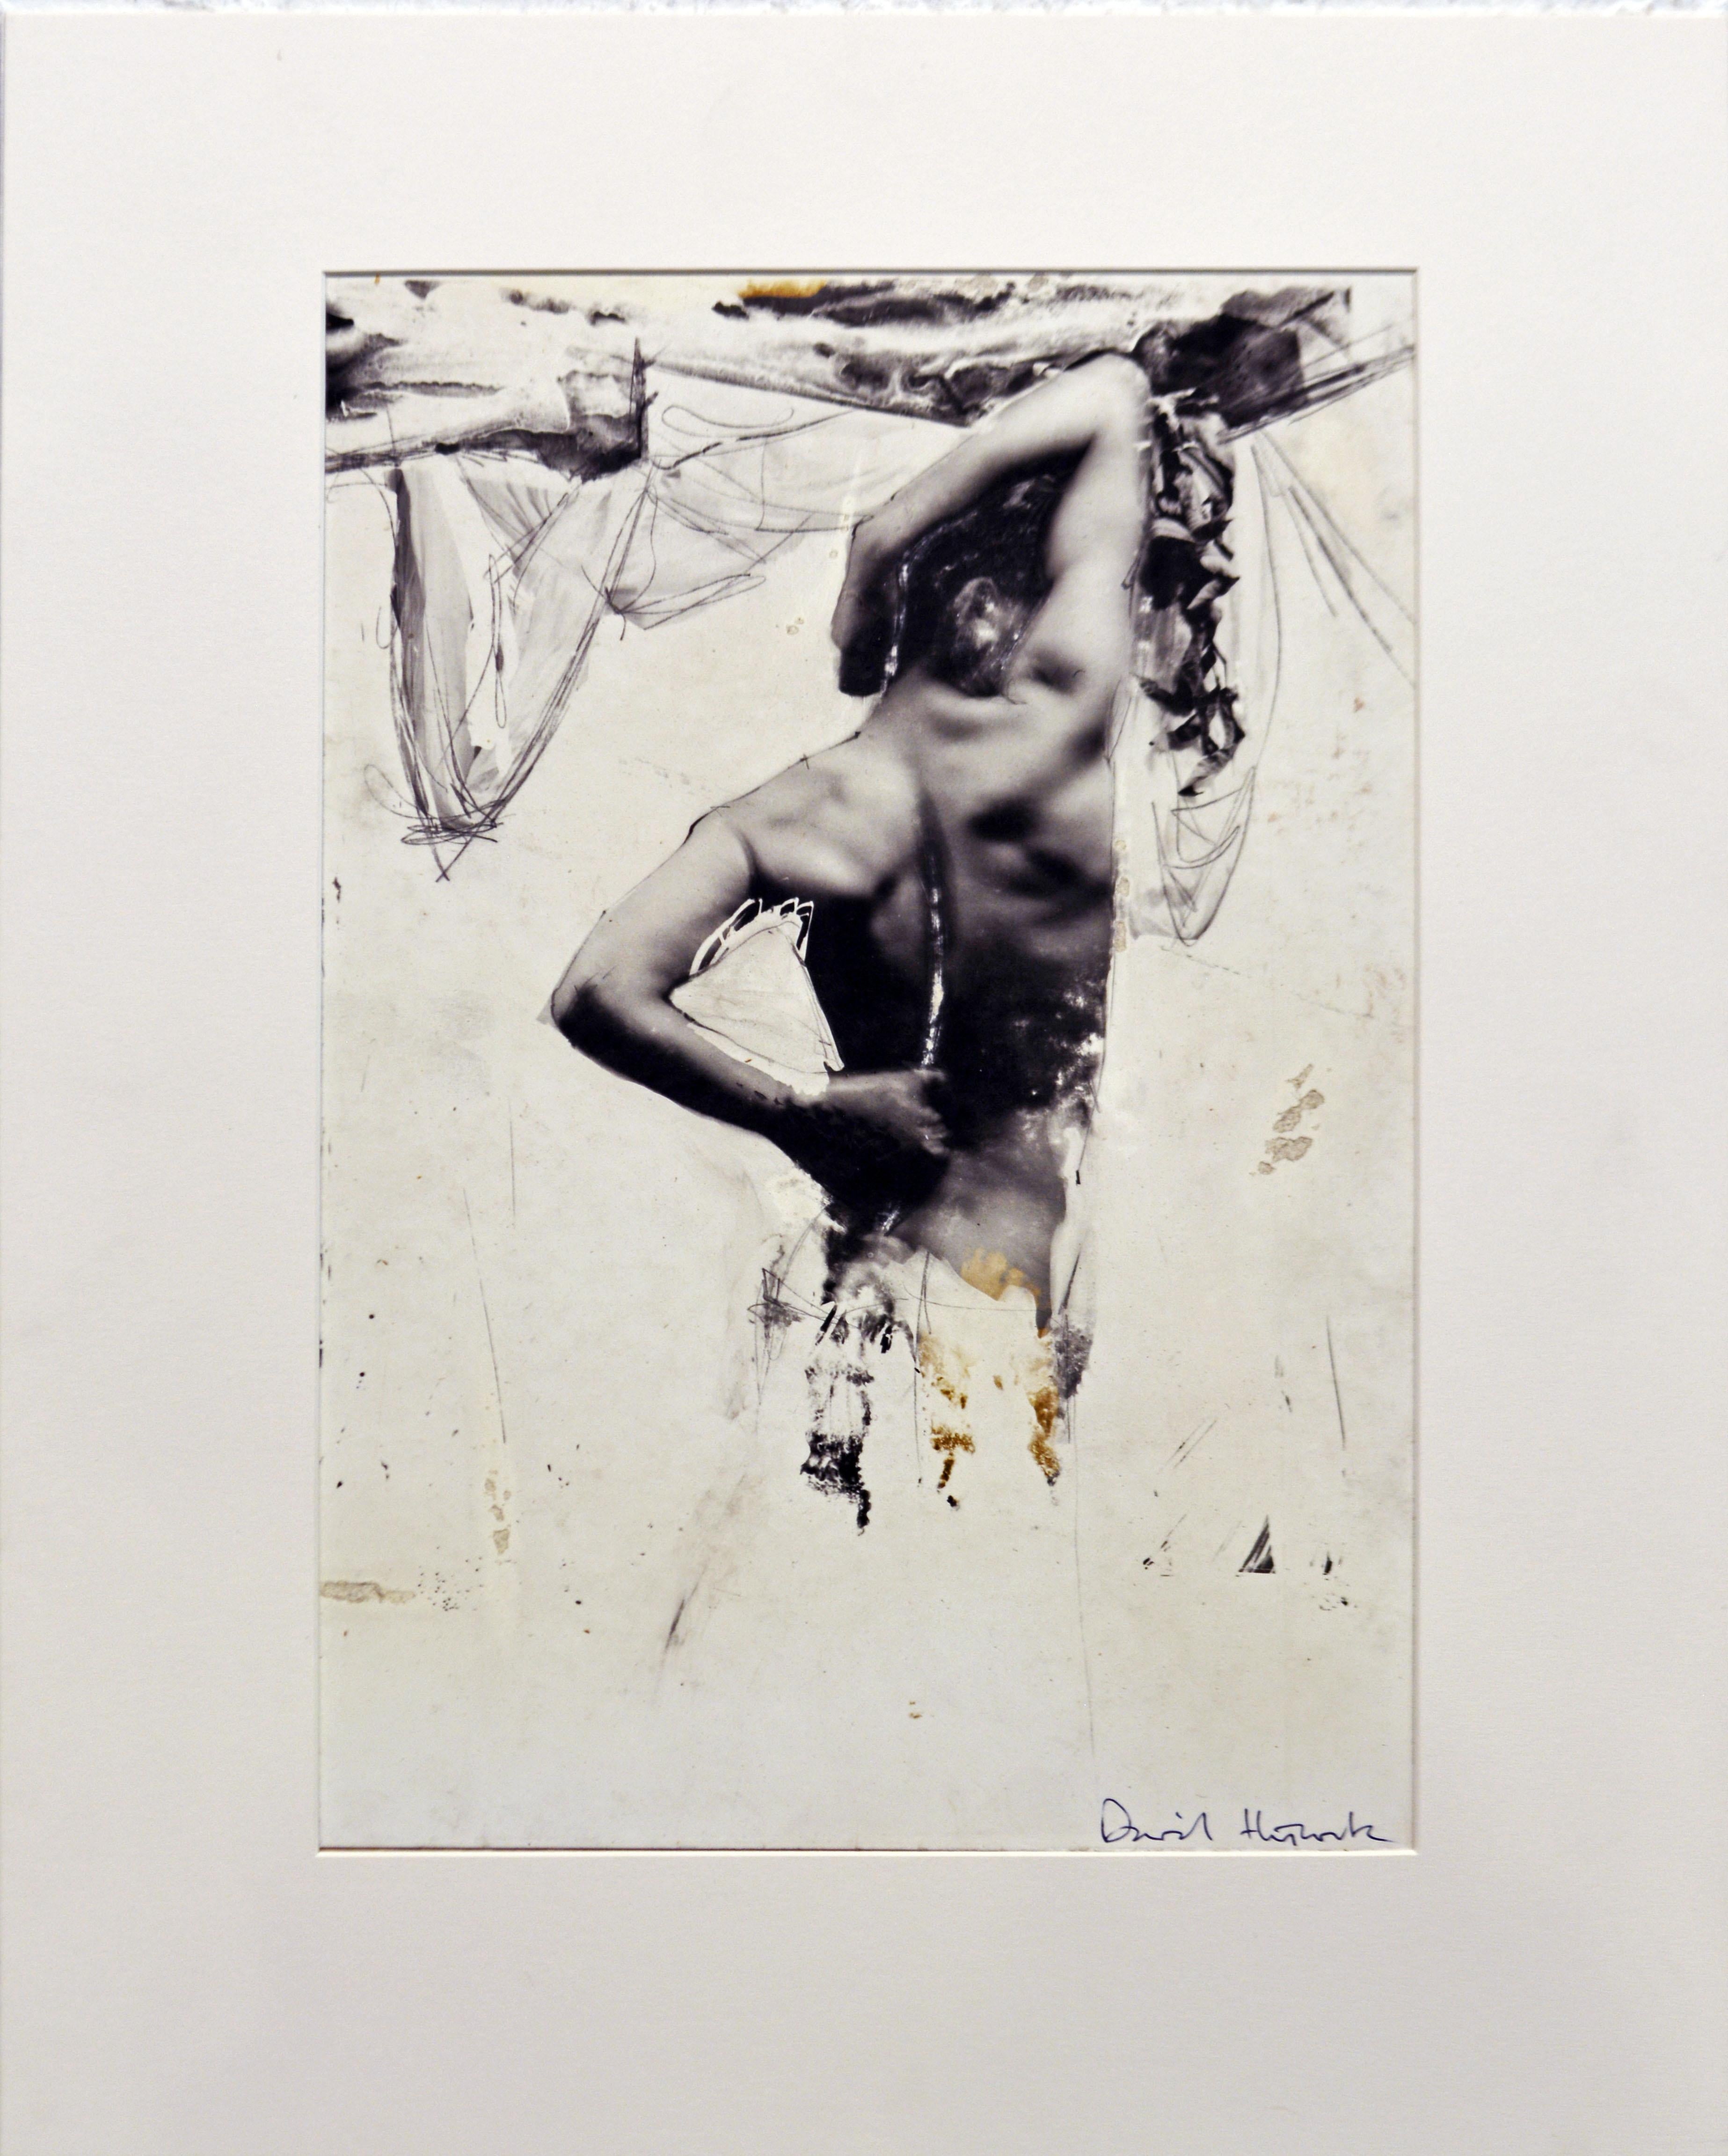 David Hiscock (British b. 1956)
'Photographic Male Nude Composition' 
Photographic and mixed media print with applied handwork.
Mounted on gray cardboard and matted. Signed recto and inscribed verso on cardboard.
Image: 10 x 14.50 in / 26 x 37